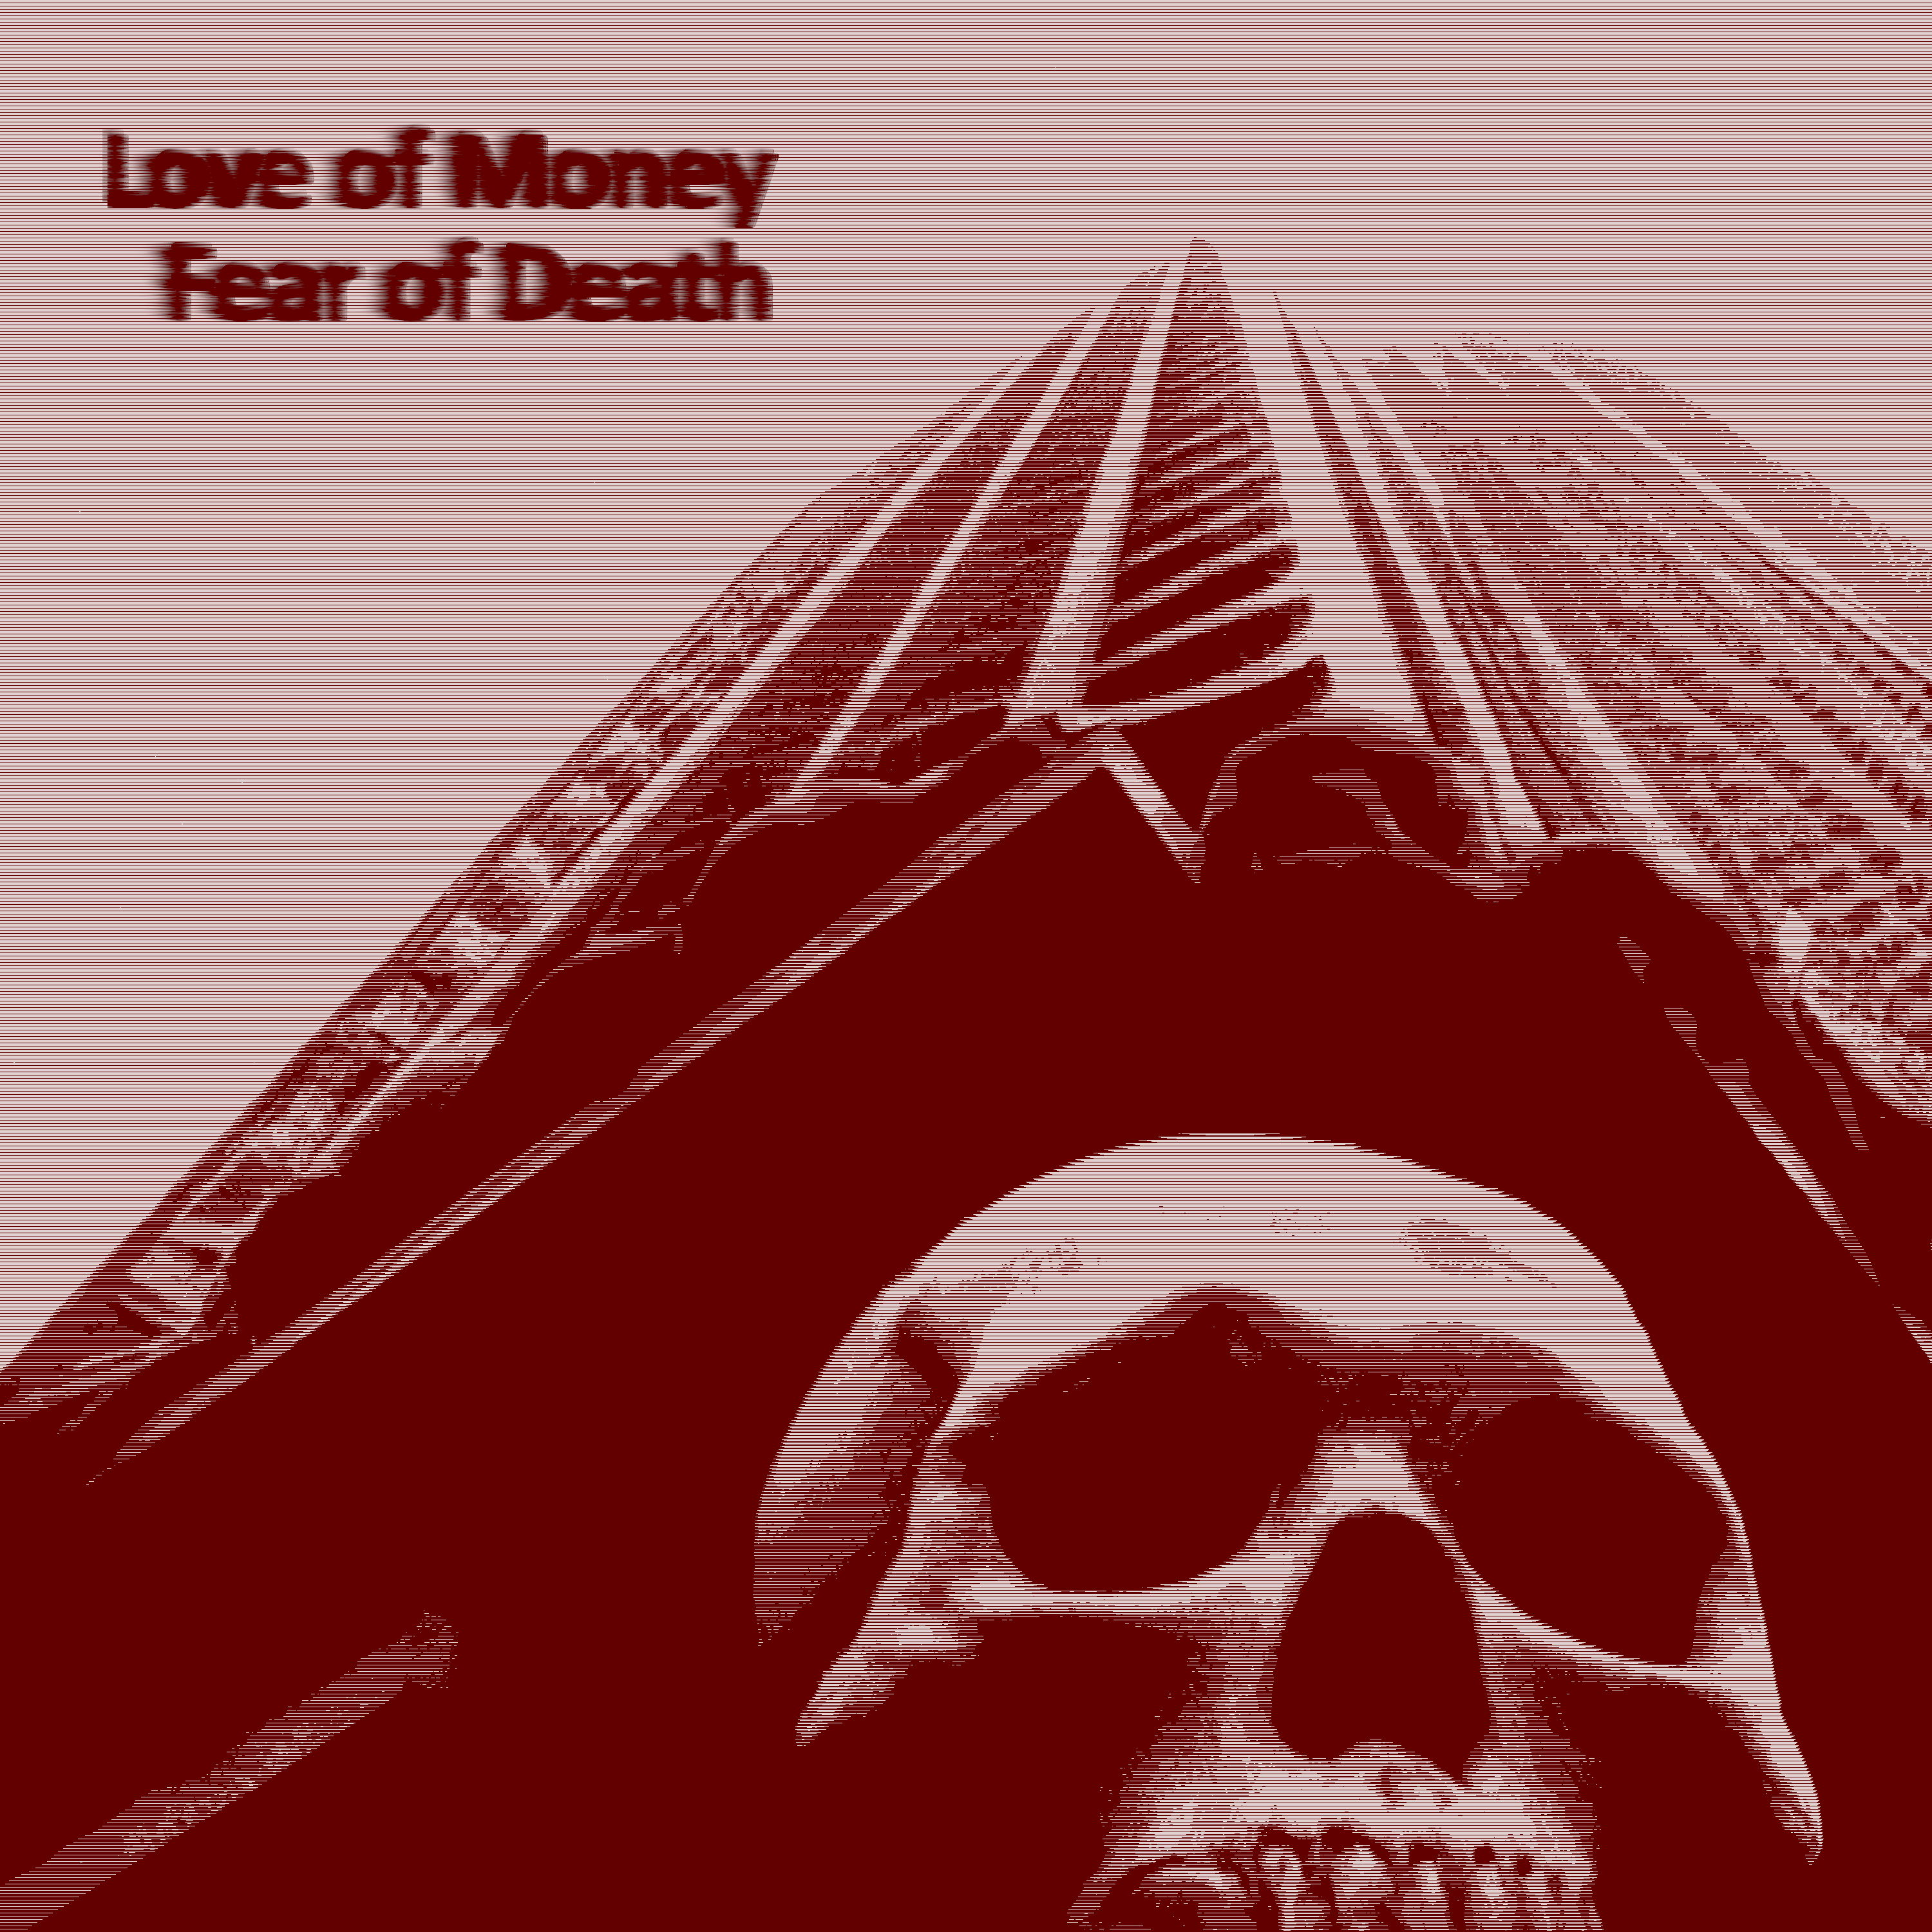 Love of Money, Fear of Death